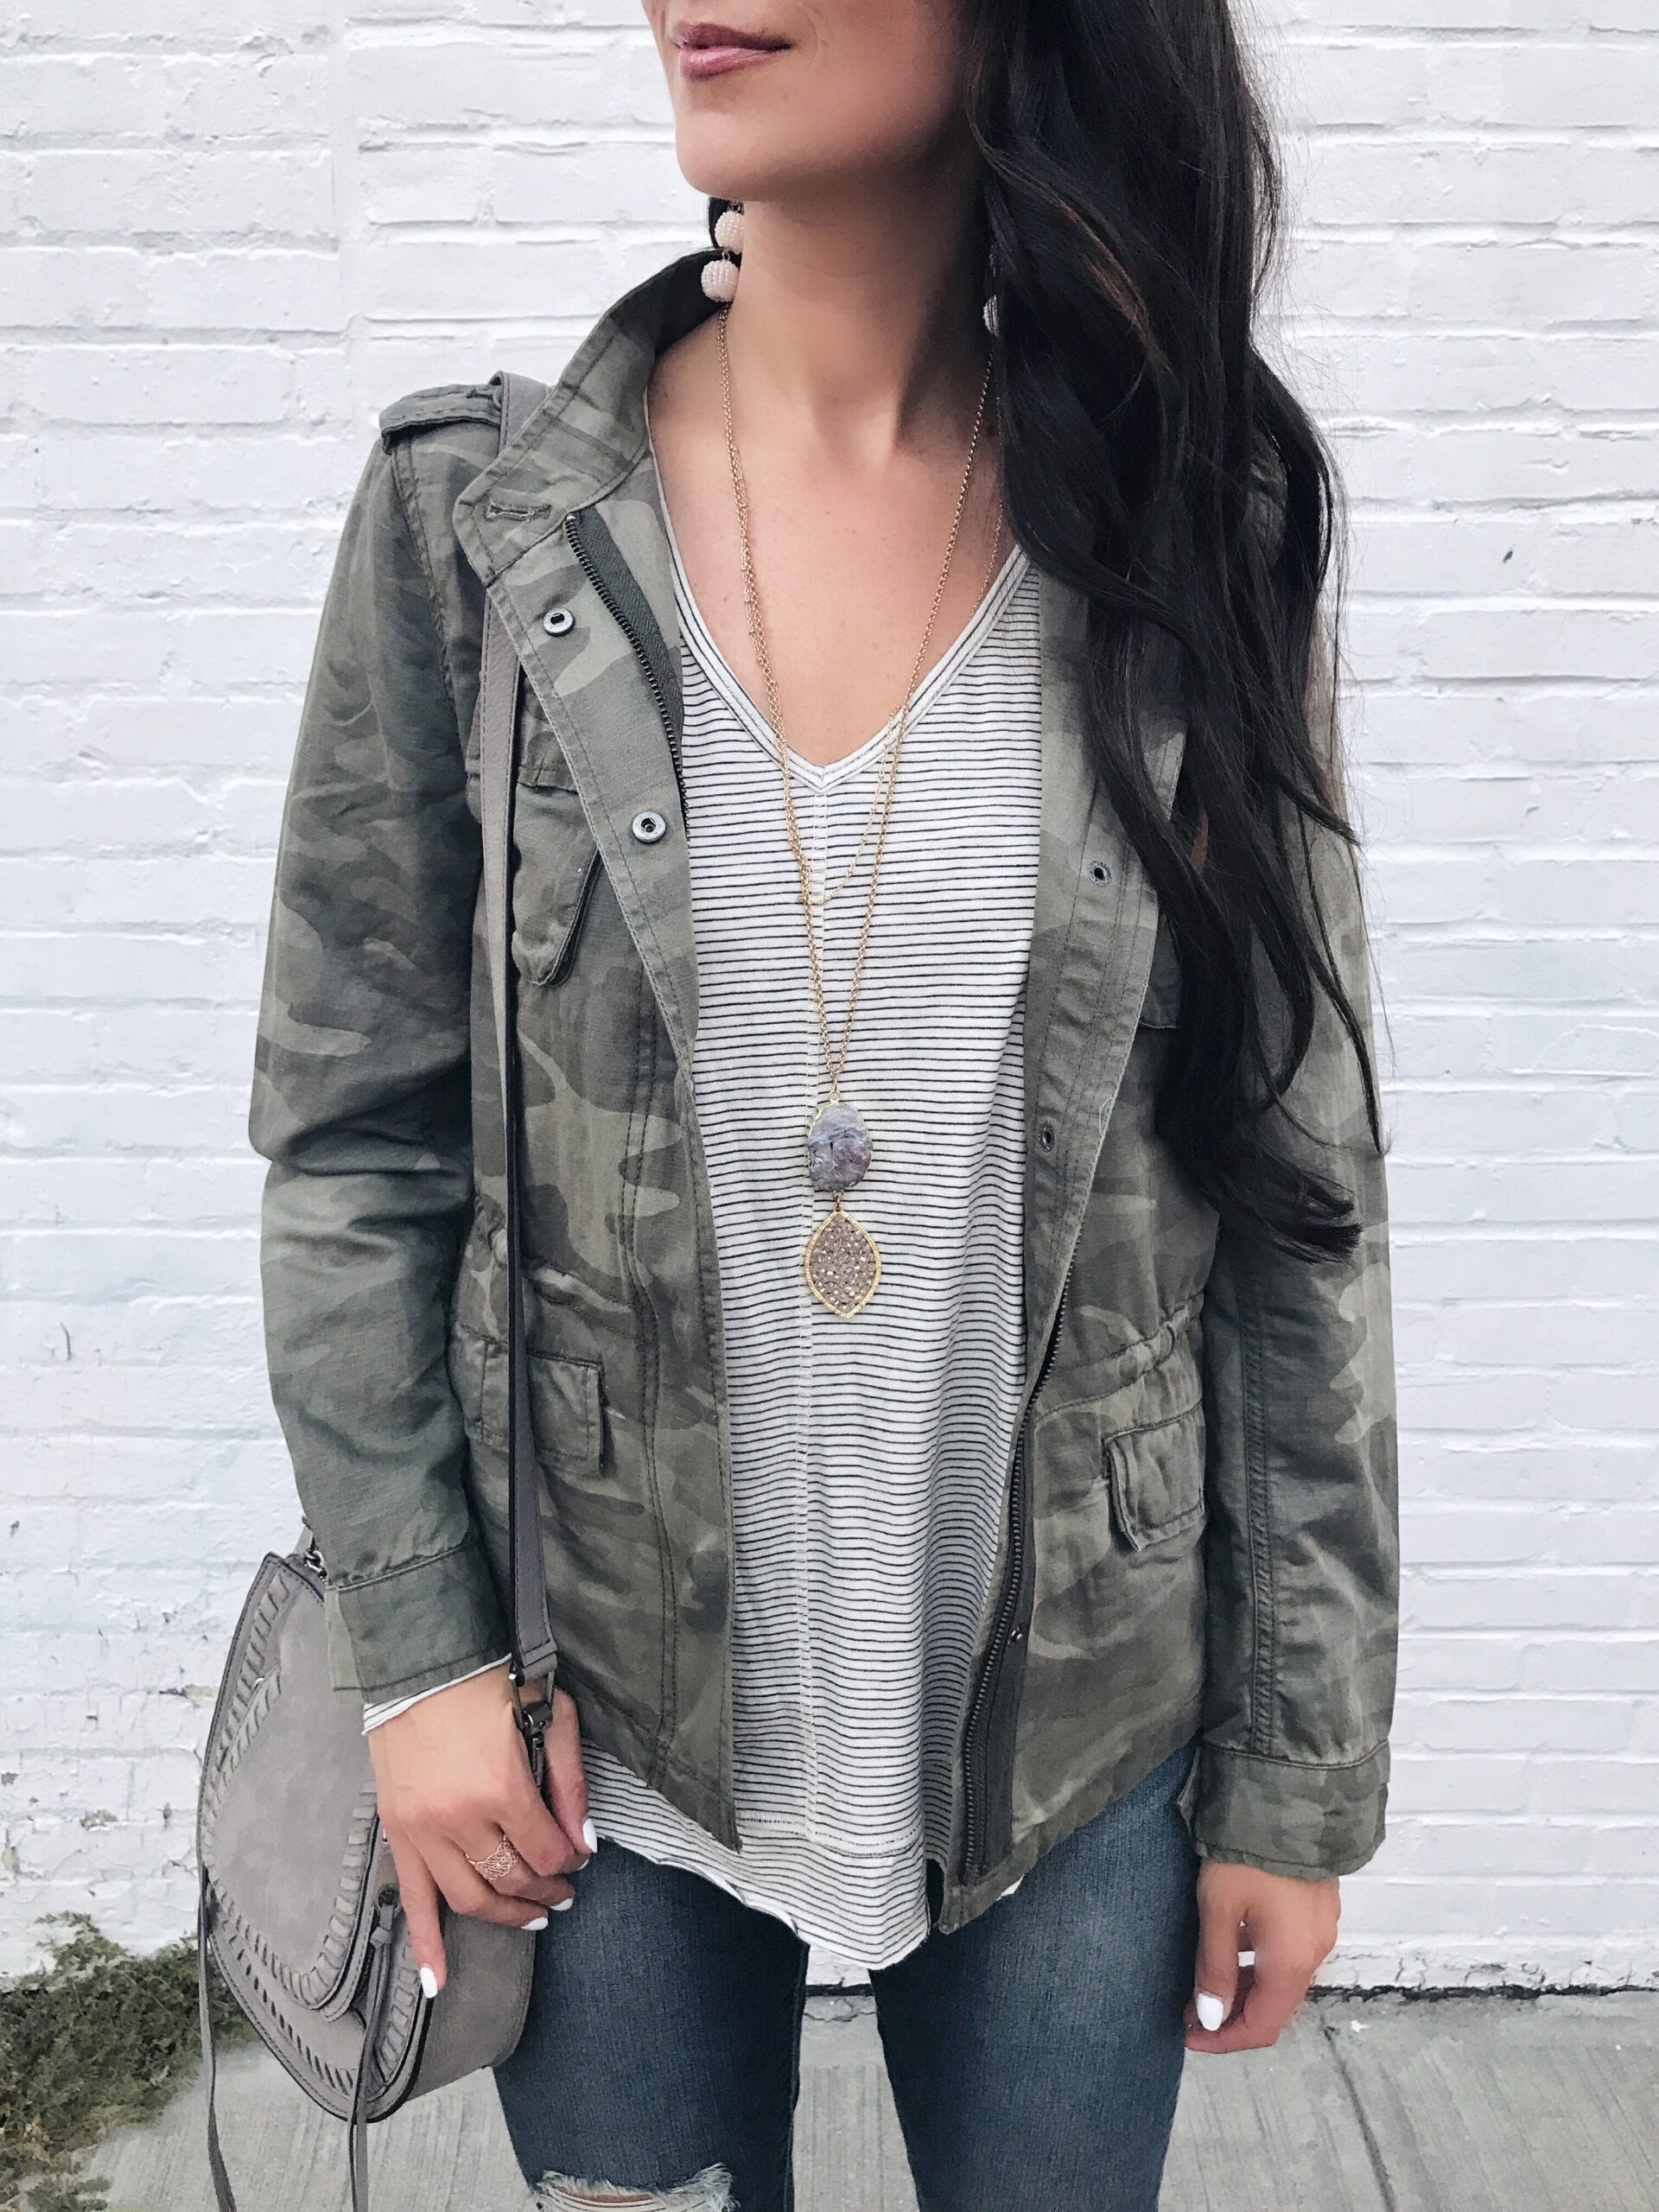 blogger Anna Monteiro of Blushing Rose STyle blog wearing LOFT camouflage jacket from labor day weekend sale round up